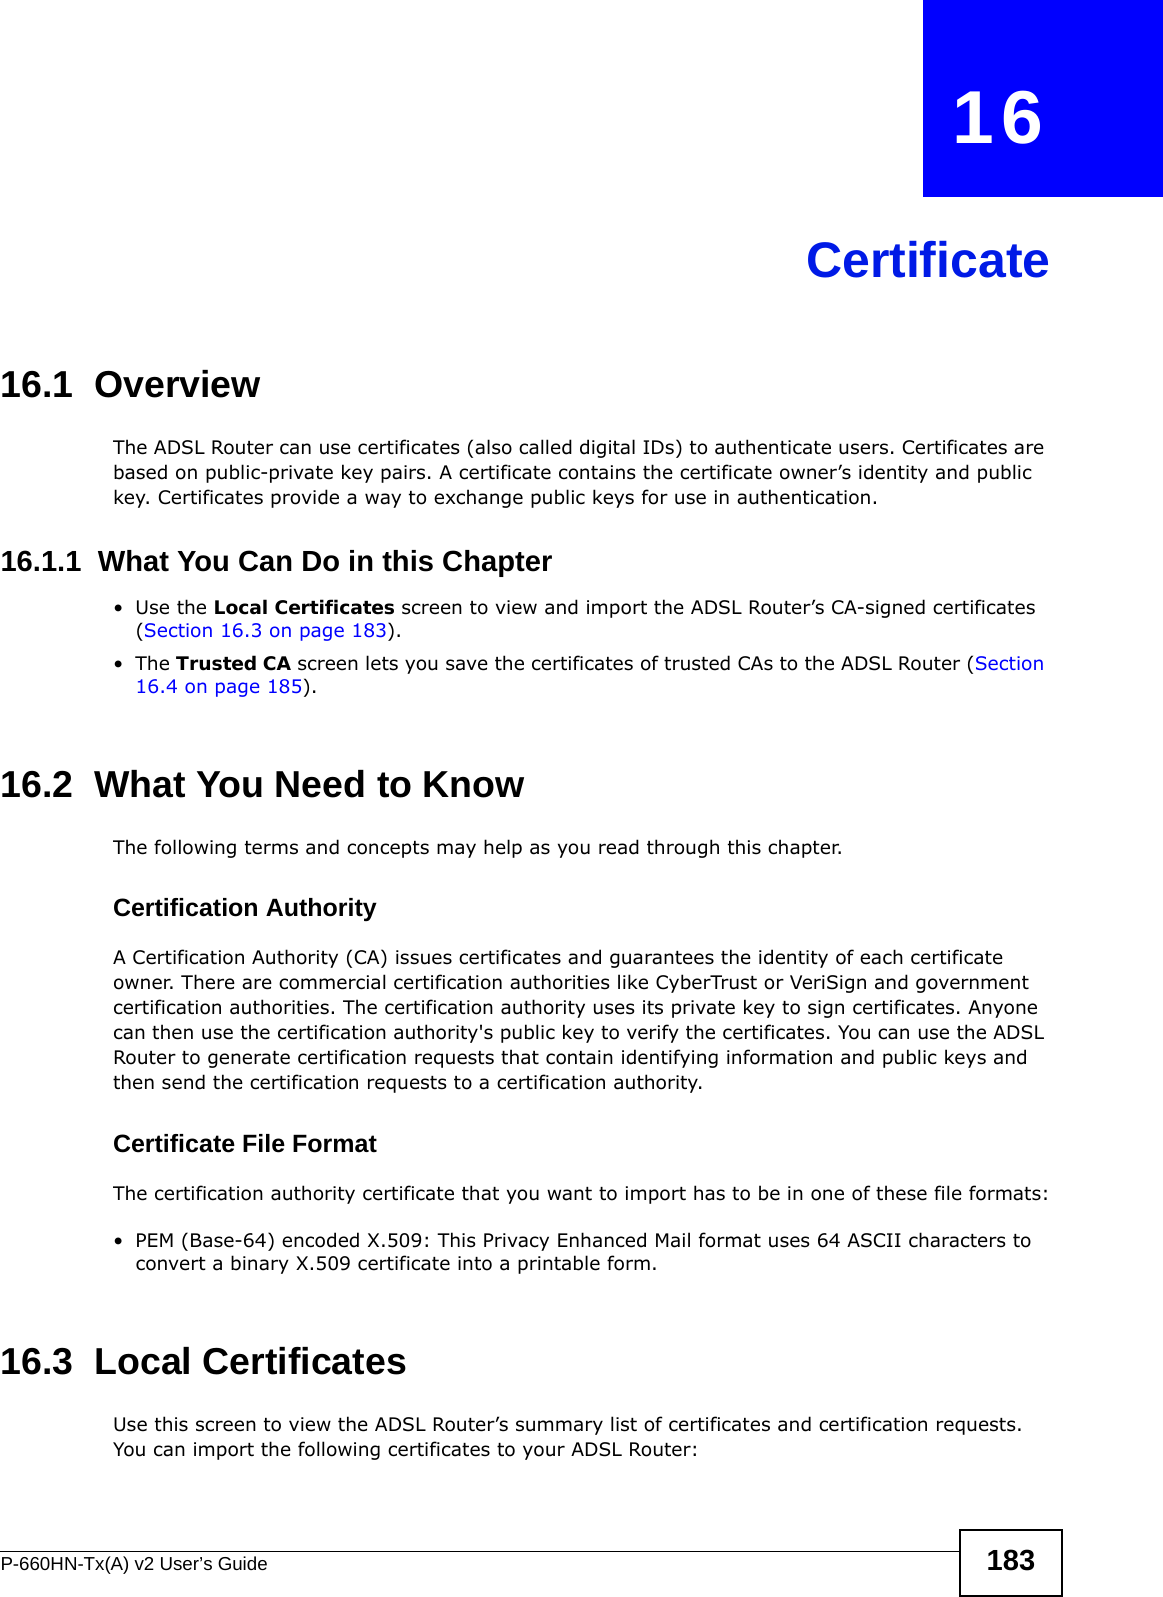 P-660HN-Tx(A) v2 User’s Guide 183CHAPTER   16Certificate16.1  OverviewThe ADSL Router can use certificates (also called digital IDs) to authenticate users. Certificates are based on public-private key pairs. A certificate contains the certificate owner’s identity and public key. Certificates provide a way to exchange public keys for use in authentication. 16.1.1  What You Can Do in this Chapter•Use the Local Certificates screen to view and import the ADSL Router’s CA-signed certificates (Section 16.3 on page 183).•The Trusted CA screen lets you save the certificates of trusted CAs to the ADSL Router (Section 16.4 on page 185).16.2  What You Need to KnowThe following terms and concepts may help as you read through this chapter.Certification Authority A Certification Authority (CA) issues certificates and guarantees the identity of each certificate owner. There are commercial certification authorities like CyberTrust or VeriSign and government certification authorities. The certification authority uses its private key to sign certificates. Anyone can then use the certification authority&apos;s public key to verify the certificates. You can use the ADSL Router to generate certification requests that contain identifying information and public keys and then send the certification requests to a certification authority.Certificate File FormatThe certification authority certificate that you want to import has to be in one of these file formats:• PEM (Base-64) encoded X.509: This Privacy Enhanced Mail format uses 64 ASCII characters to convert a binary X.509 certificate into a printable form.16.3  Local CertificatesUse this screen to view the ADSL Router’s summary list of certificates and certification requests. You can import the following certificates to your ADSL Router: